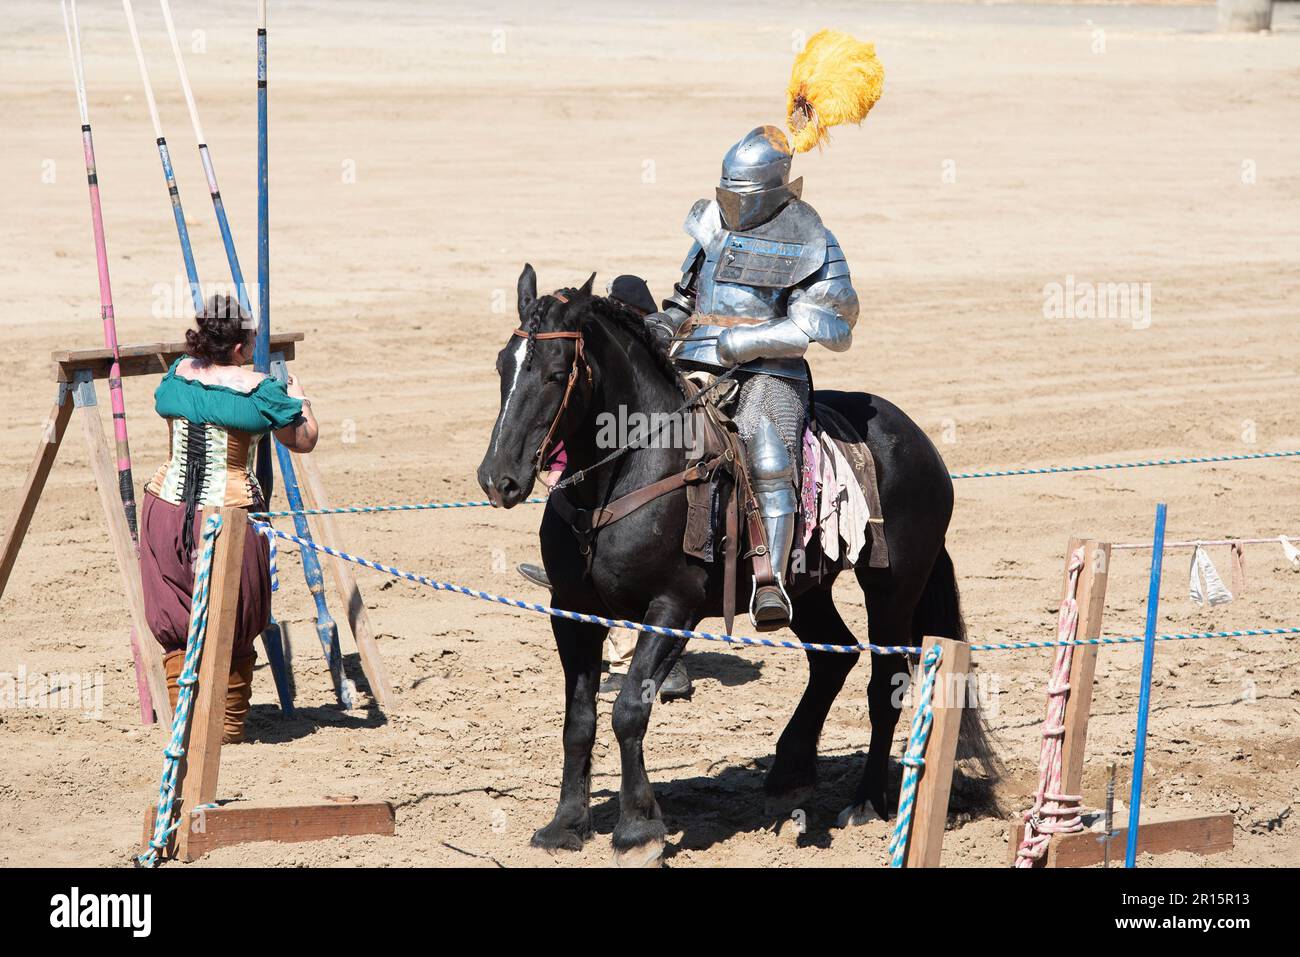 Folsom, CA, September 24, 2022. Unidentified male at the Folsom Renaissance Faire dressed as a knight ridding a black horse in the arena Stock Photo